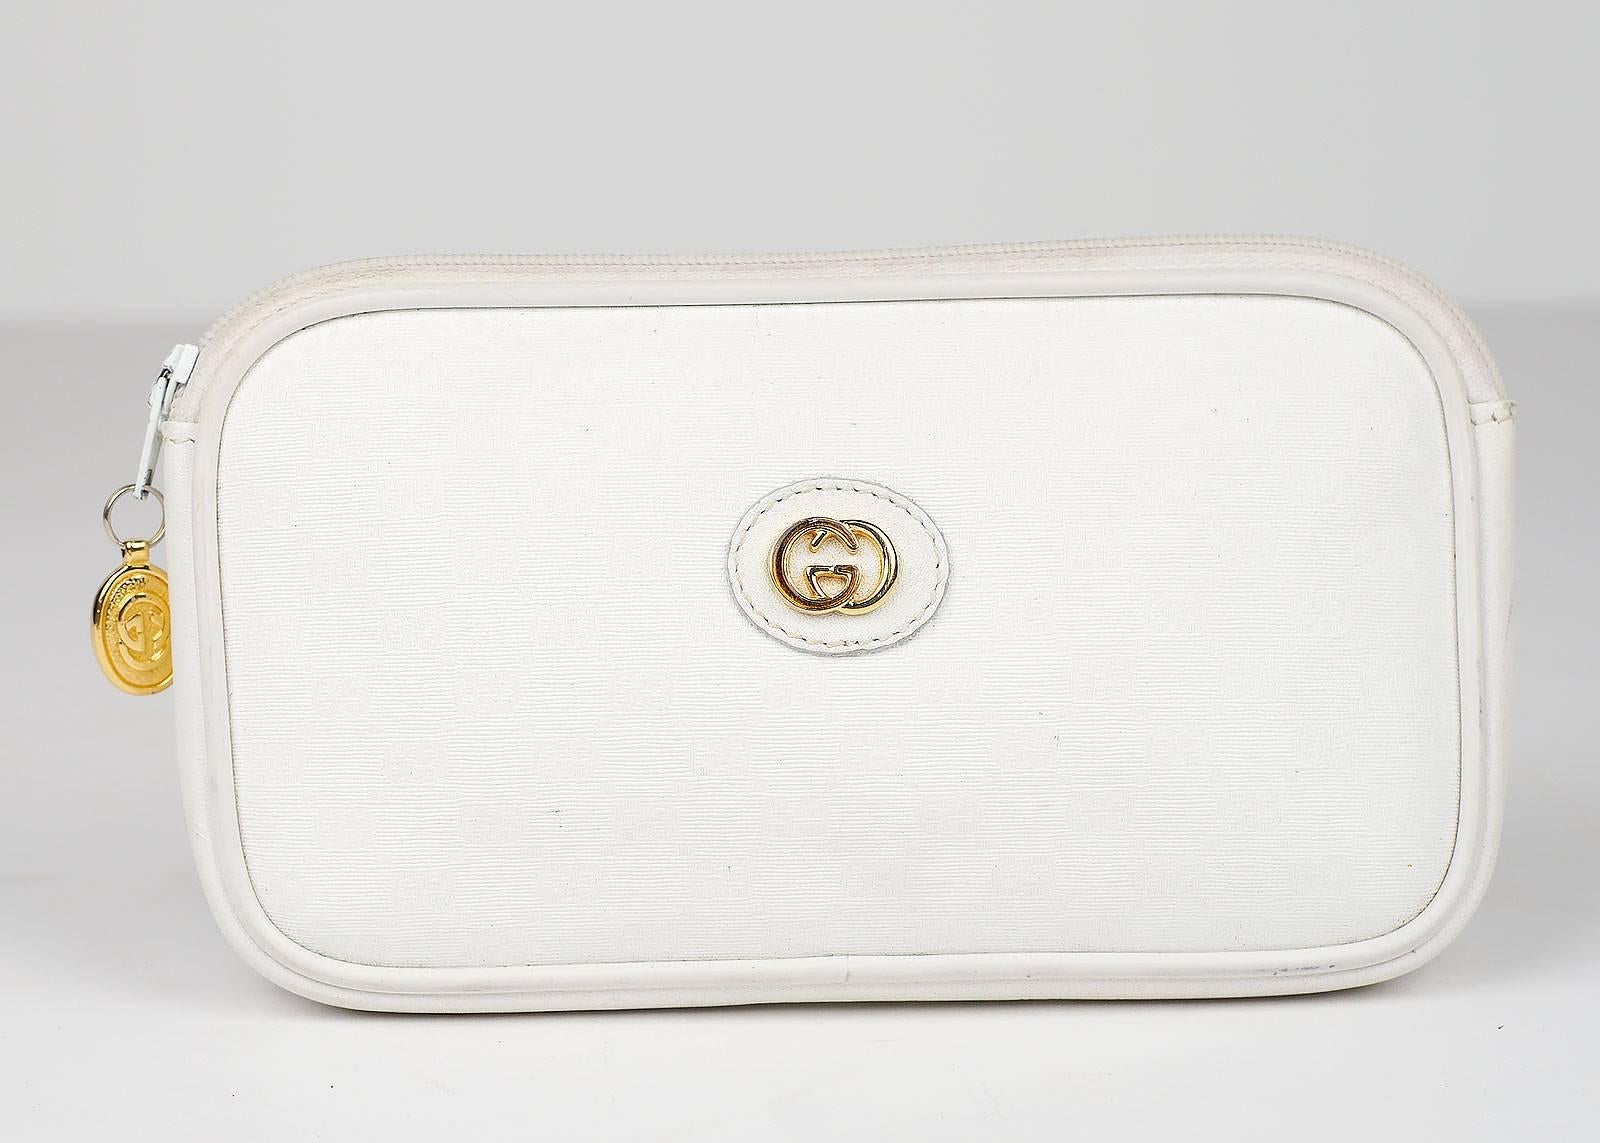 Gucci white leather double G pattern Makeup/Wallet Bag.

-Measurements-
length:6.25"
height: 3.5"

Good Vintage Condition:Please remember all clothes are previously owned and gently worn unless otherwise noted.